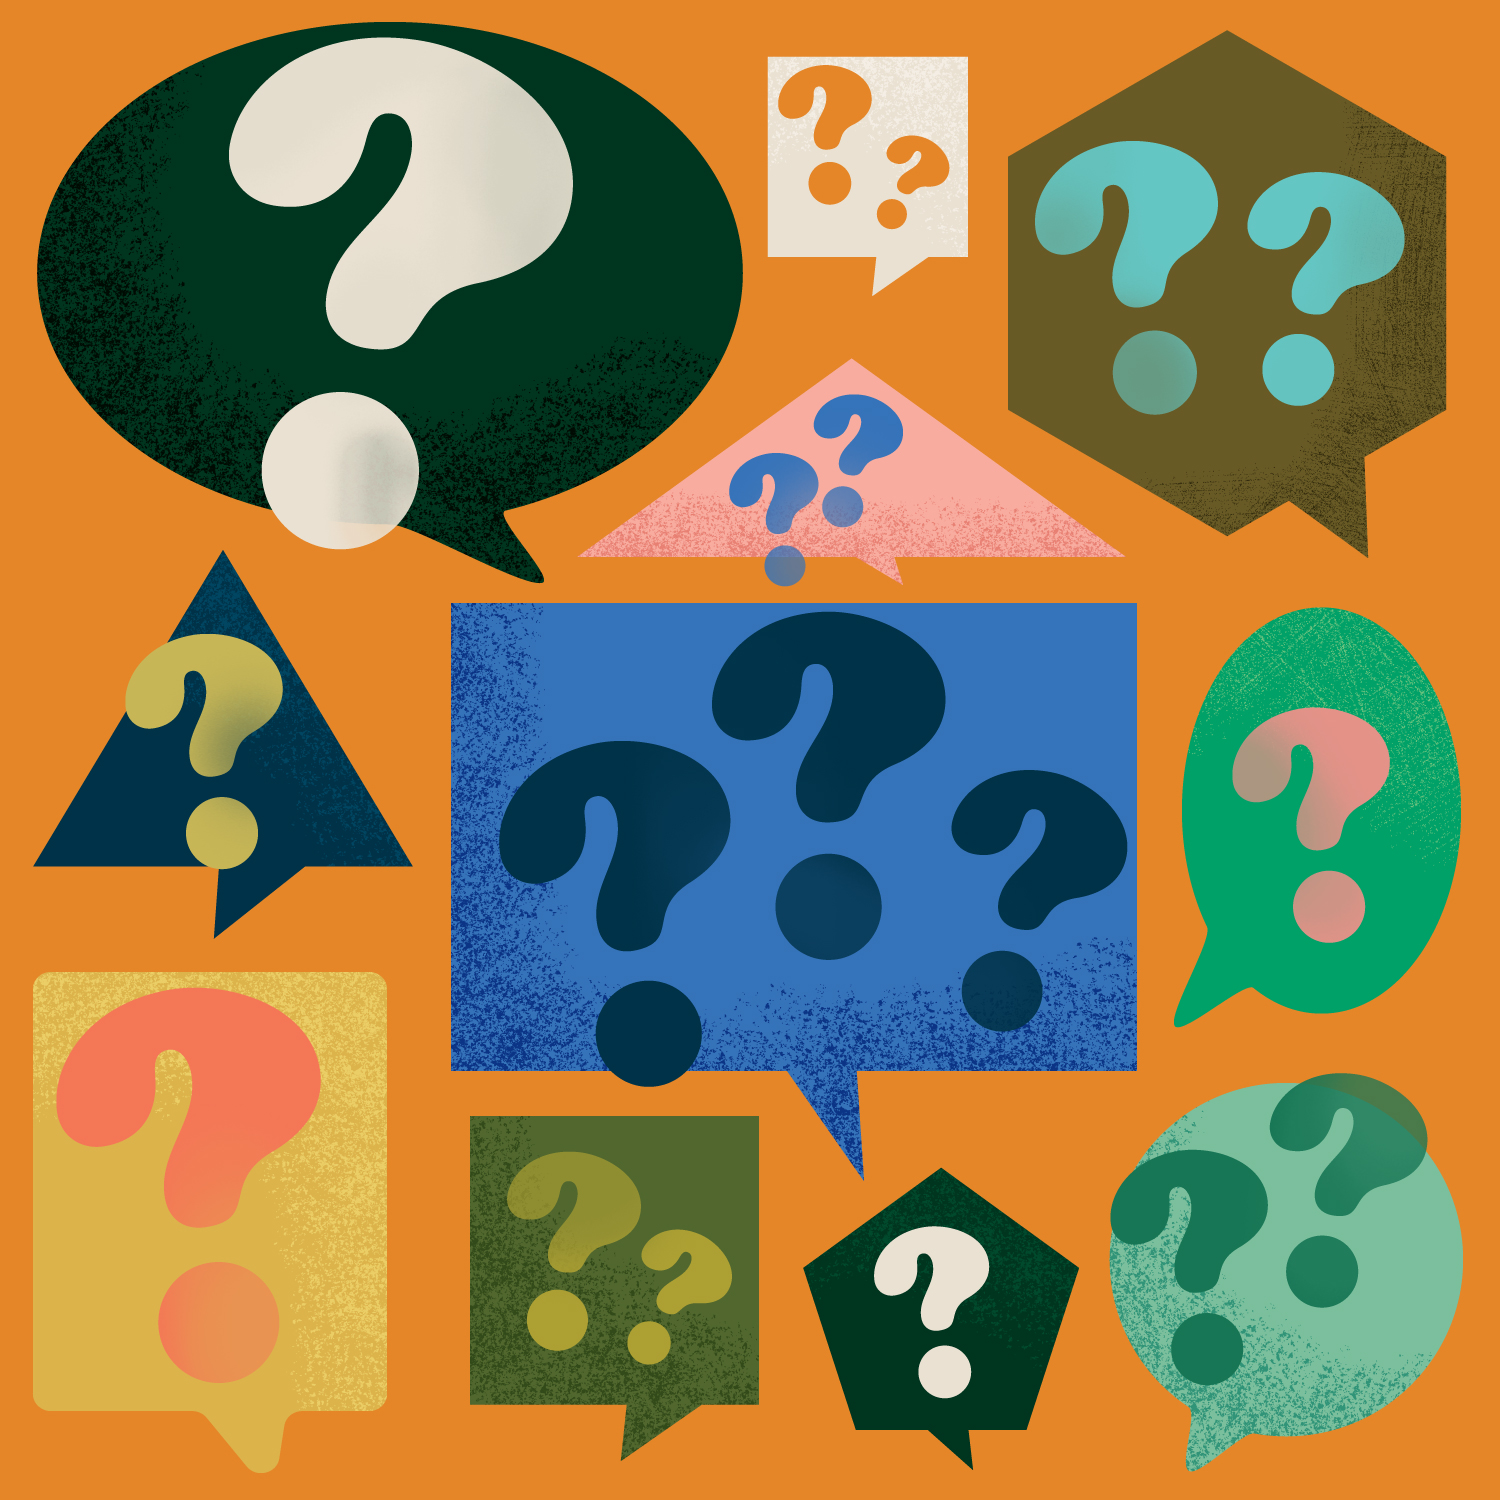 Why do designers and illustrators ask so many GD questions?